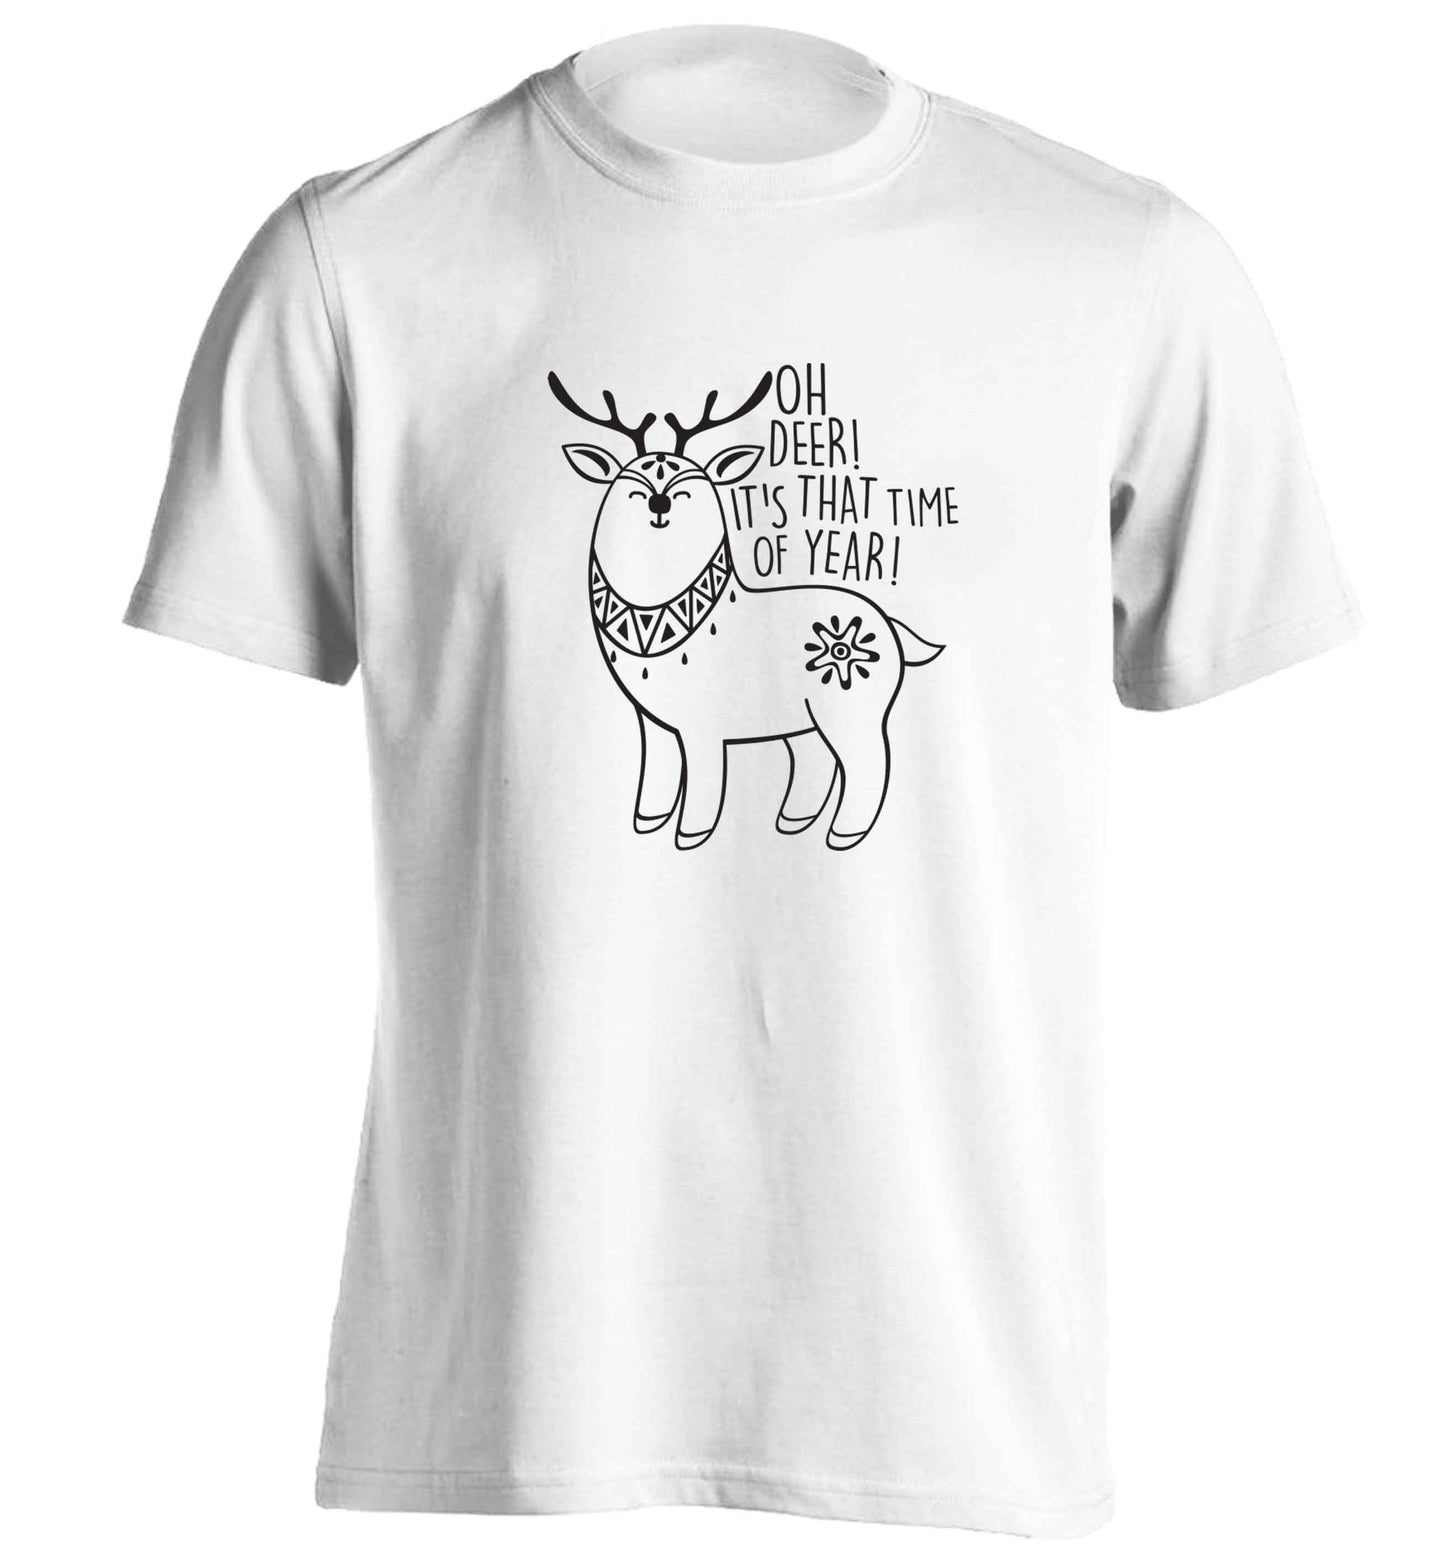 Oh dear it's that time of year adults unisex white Tshirt 2XL